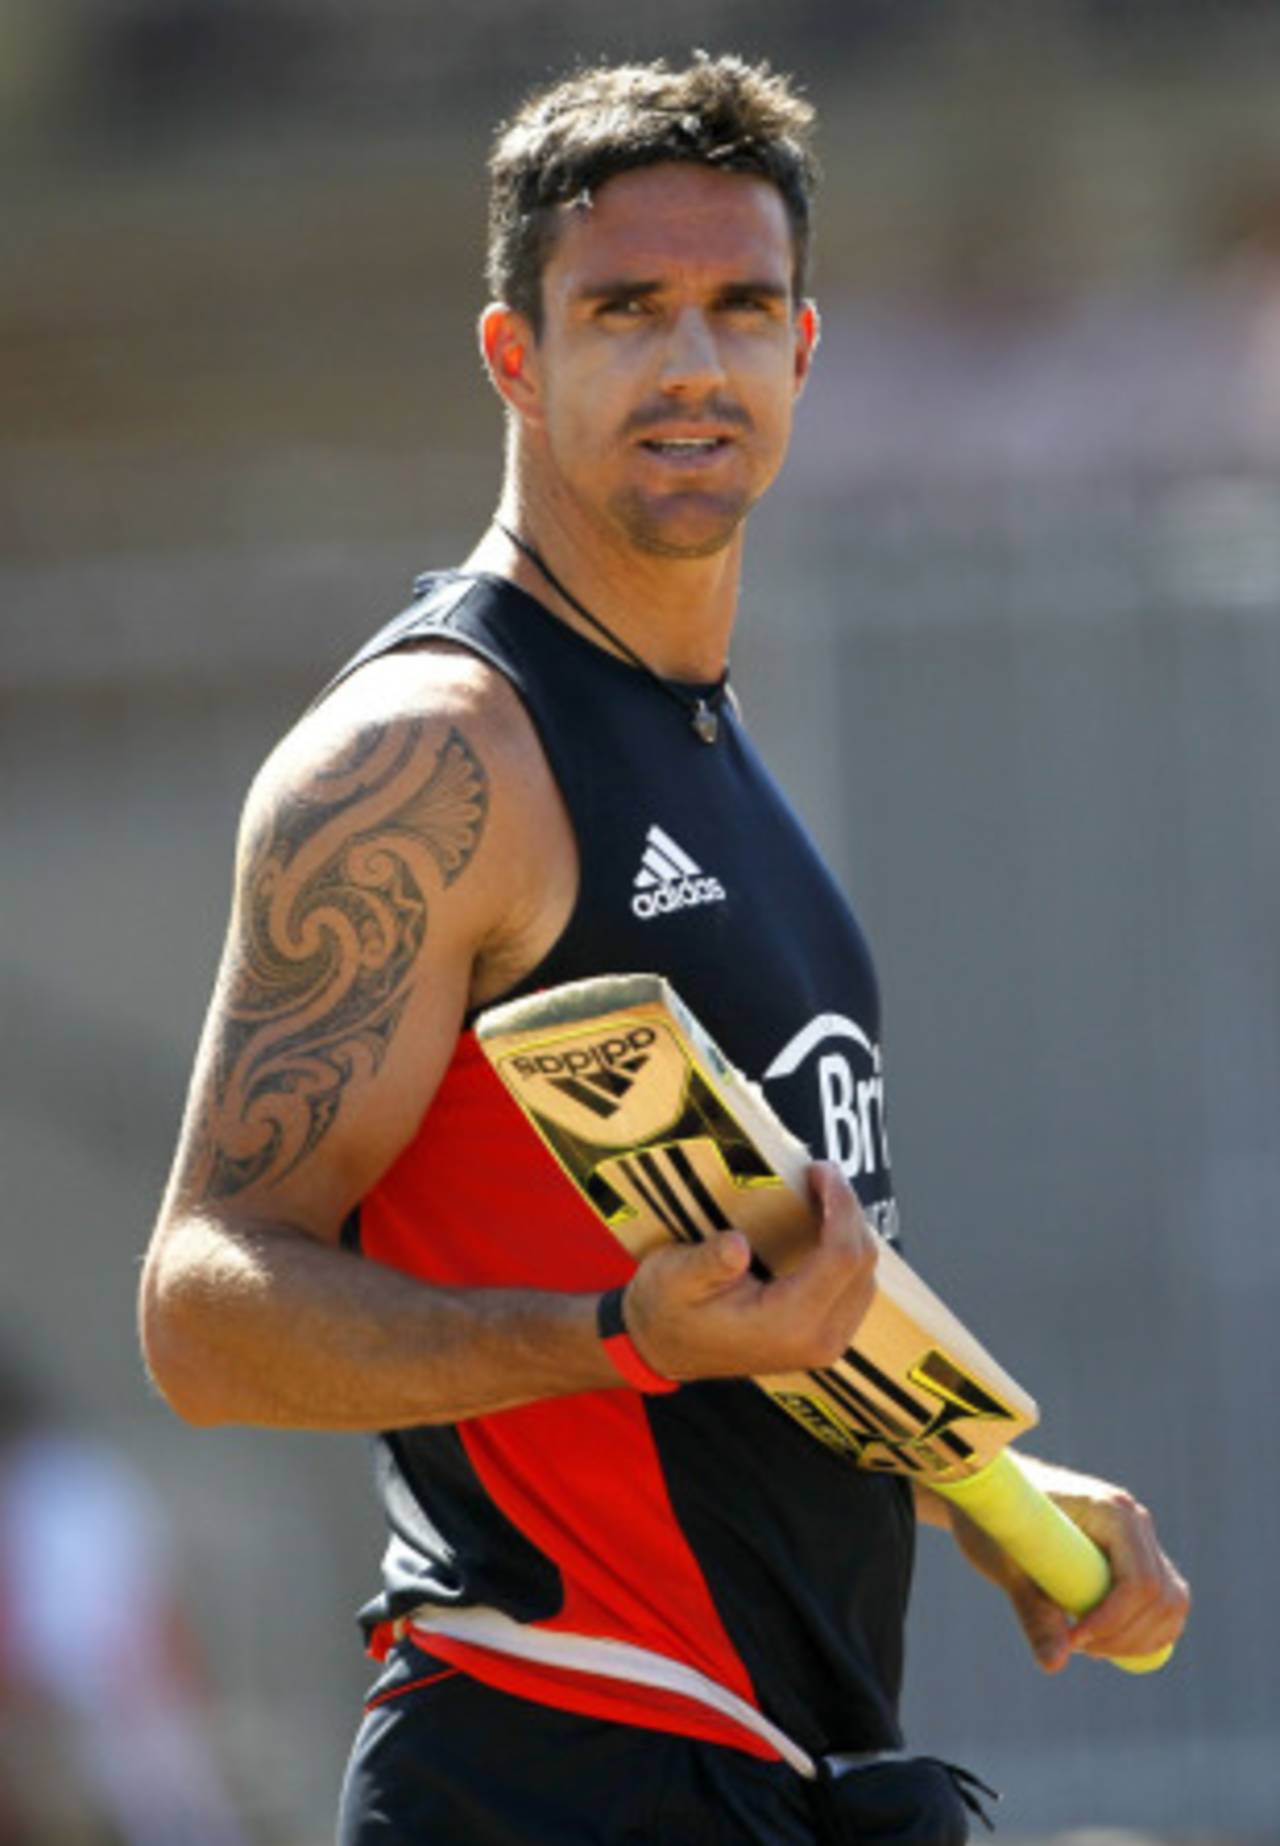 Kevin Pietersen at England's training session ahead of their World Cup match against South Africa, Chennai, March 5, 2011